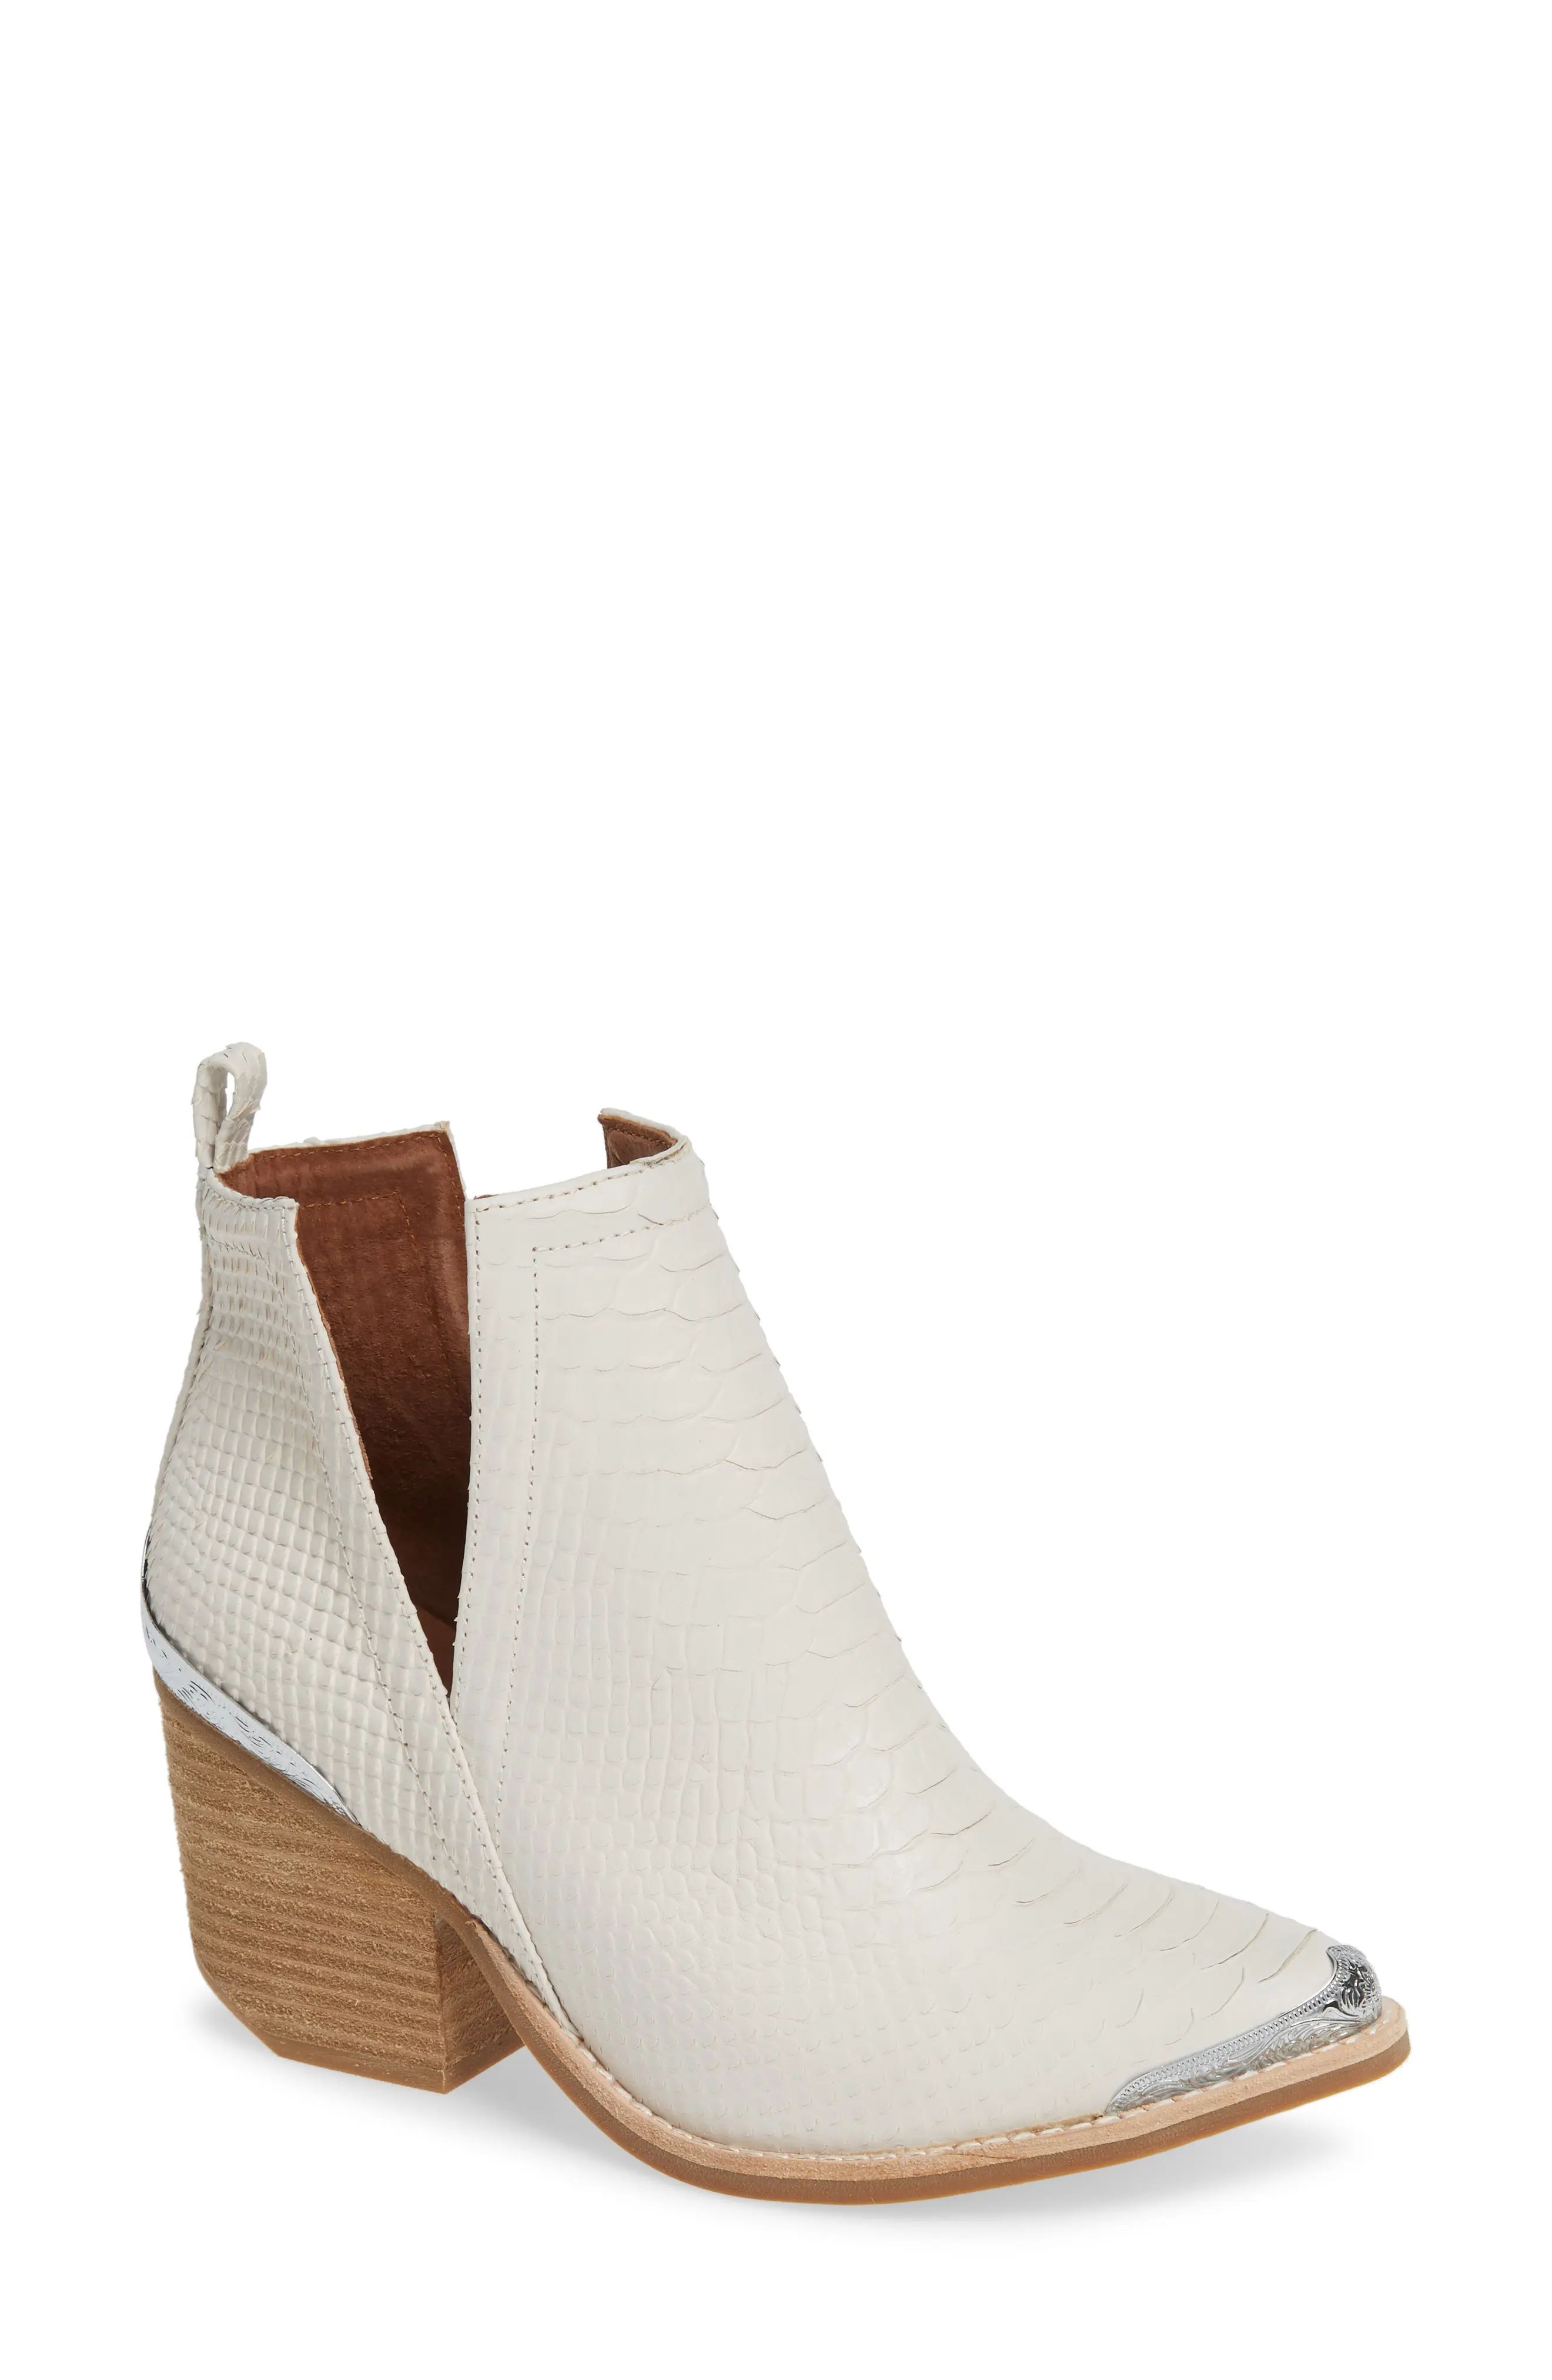 Women's Jeffrey Campbell Cromwell Cutout Western Boot, Size 10 M - White | Nordstrom